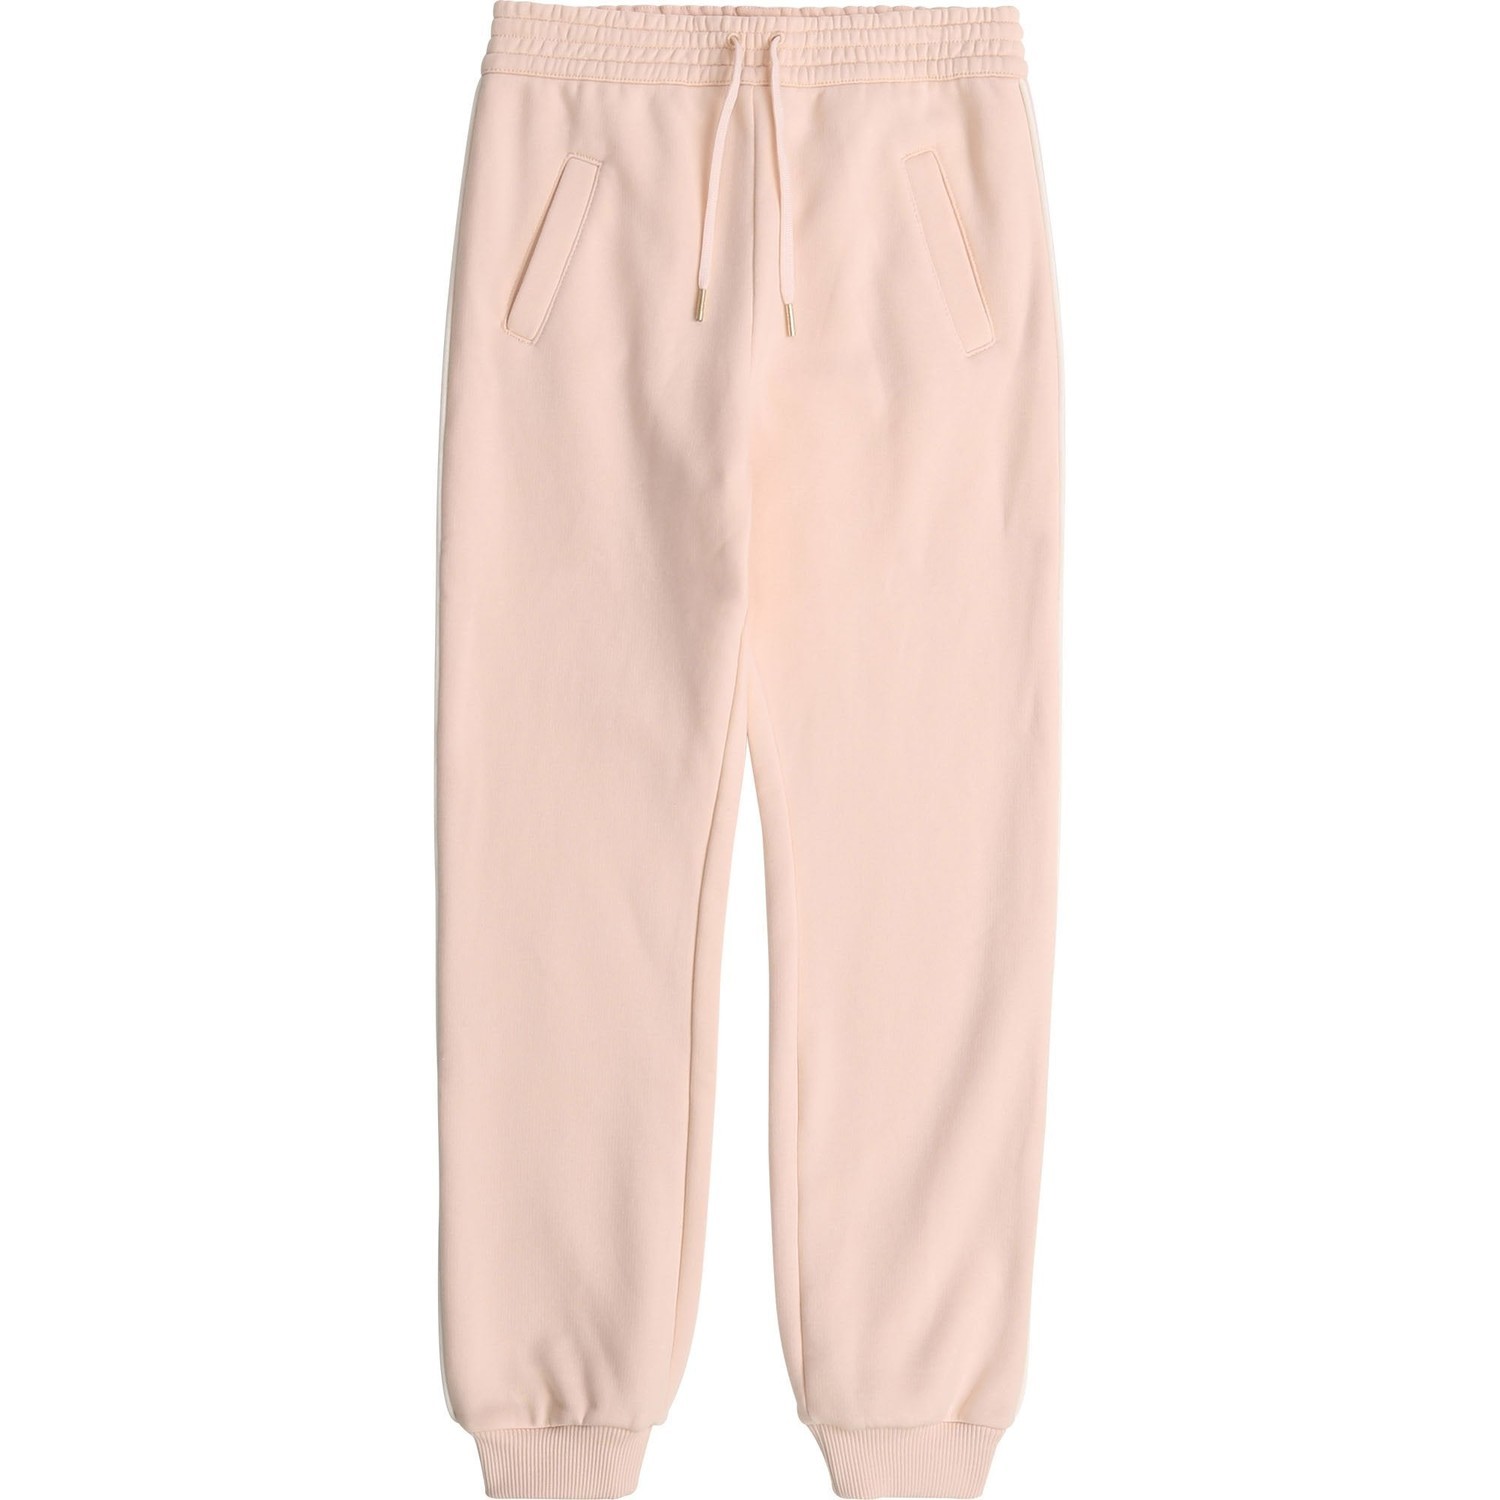 Chloe Girls Cotton Joggers Pink 10Y